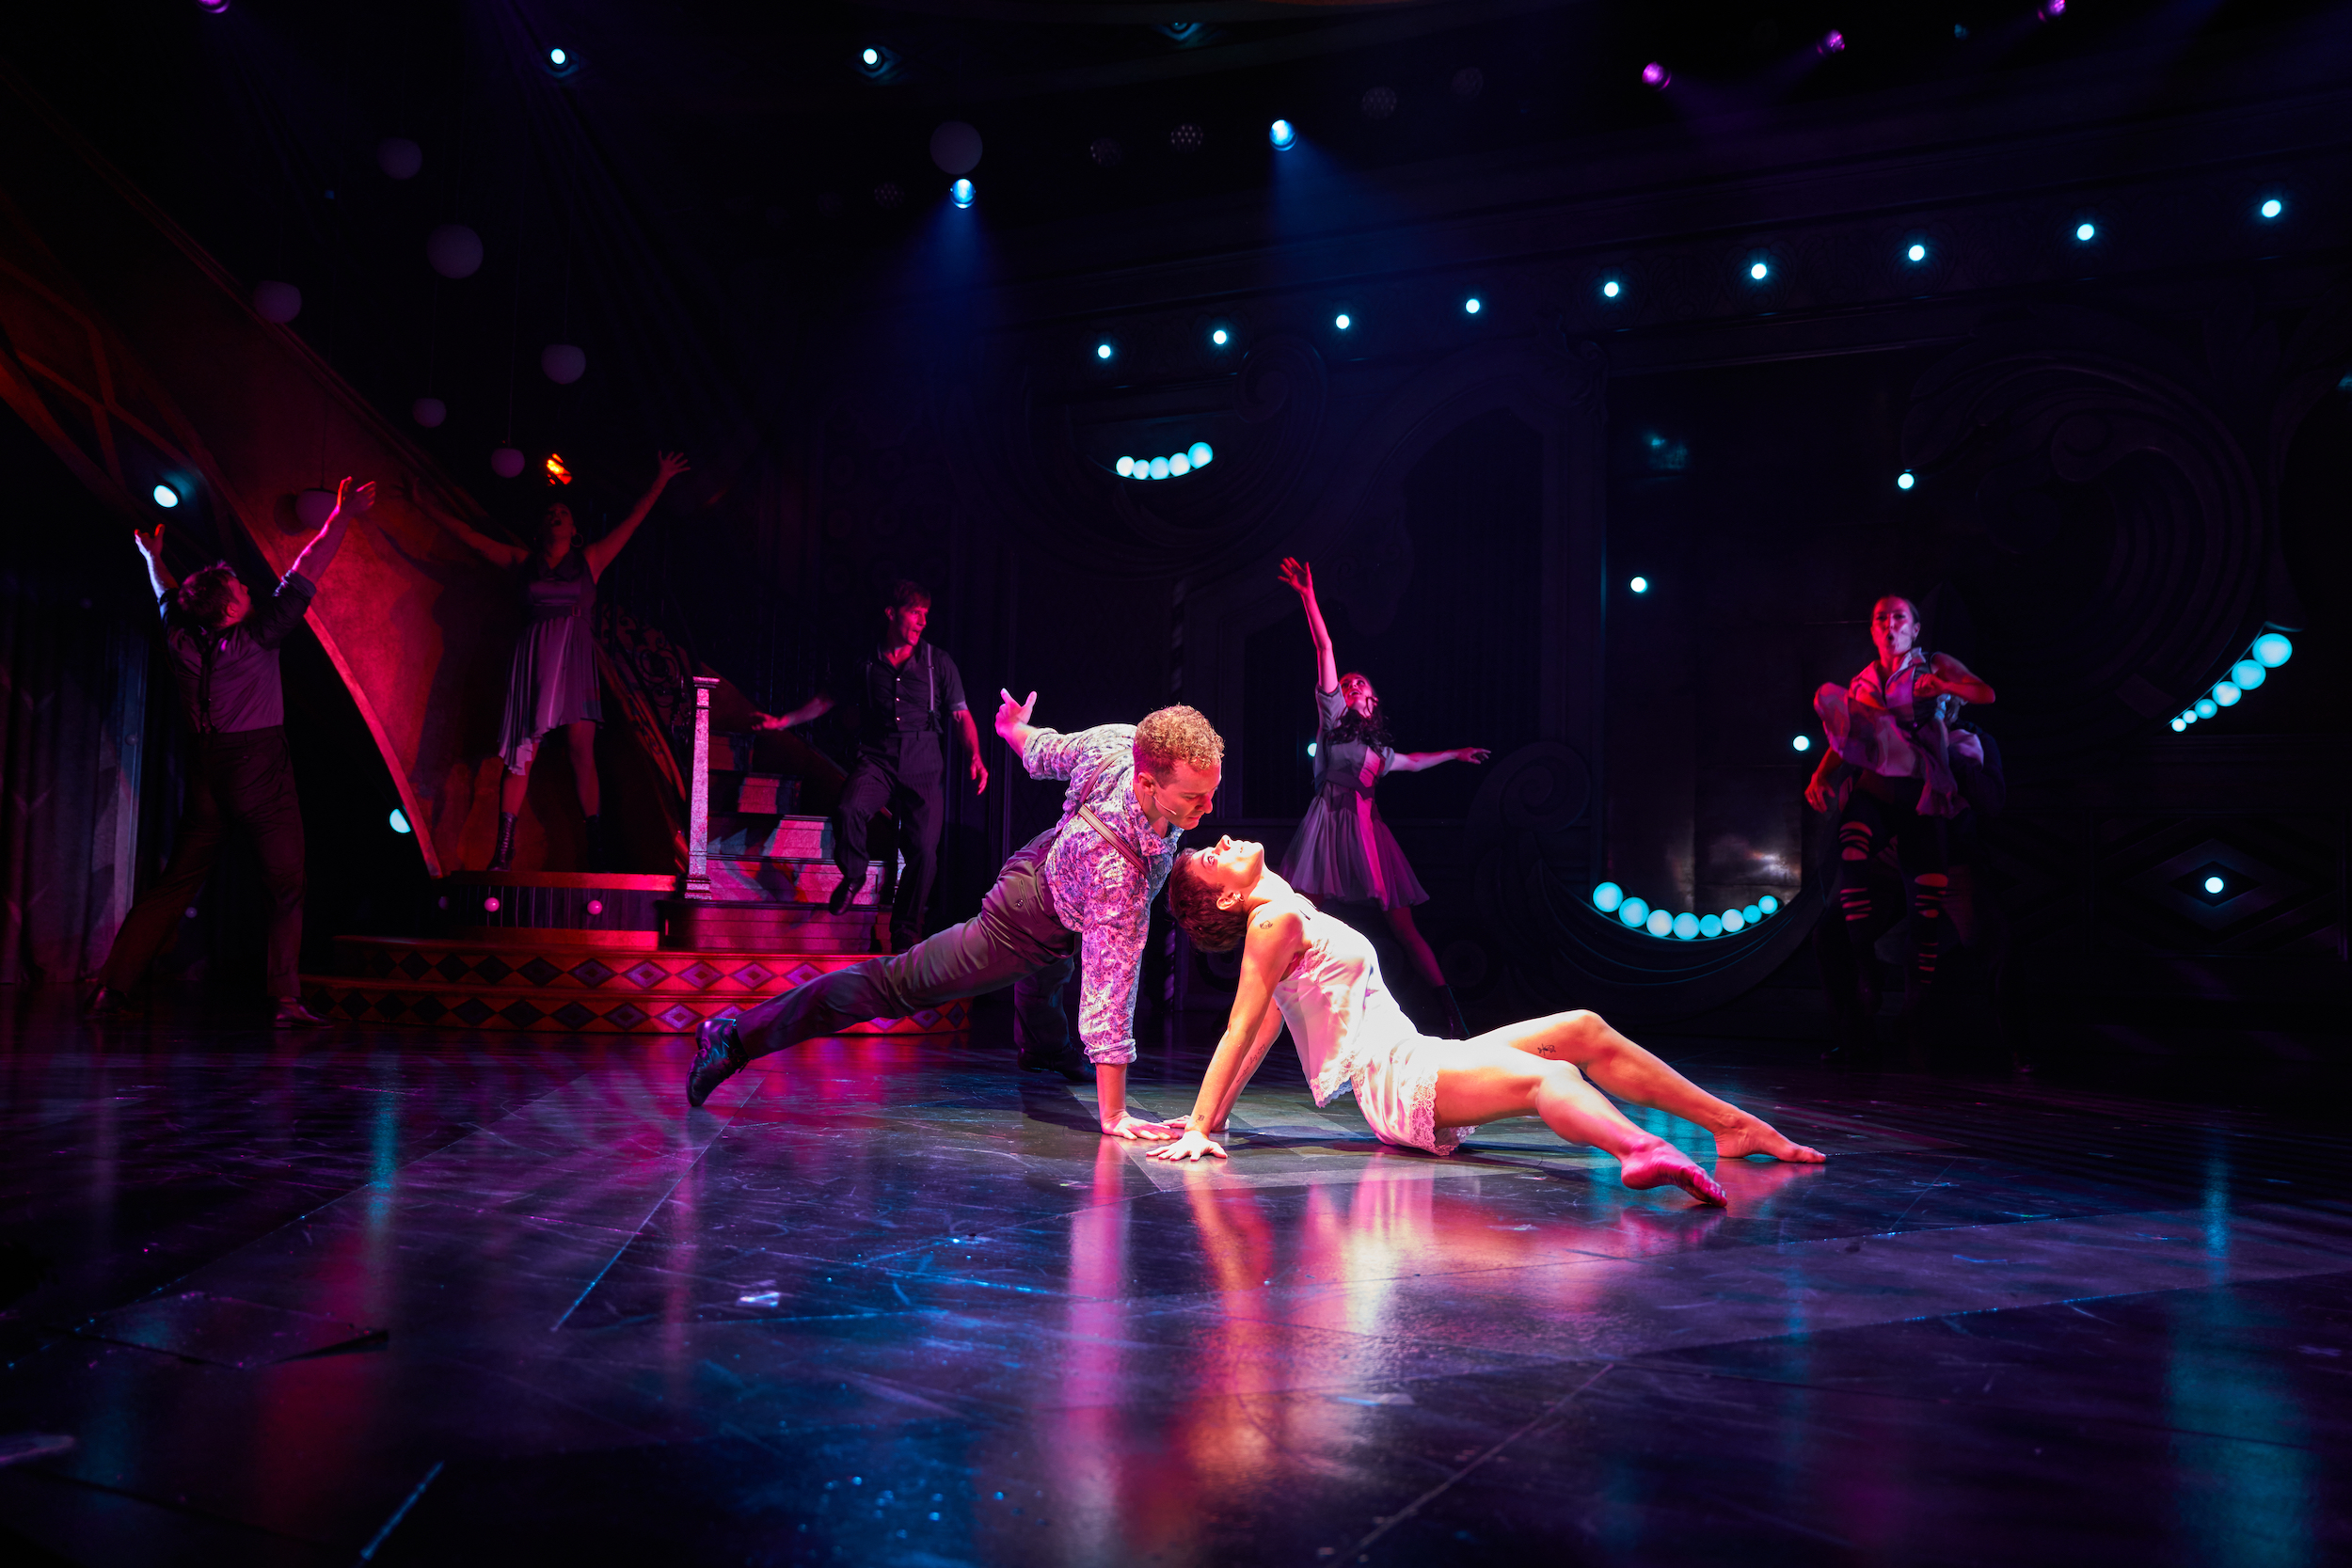 A man lunges downward hovering over his female dance partner as she arches back toward his face.